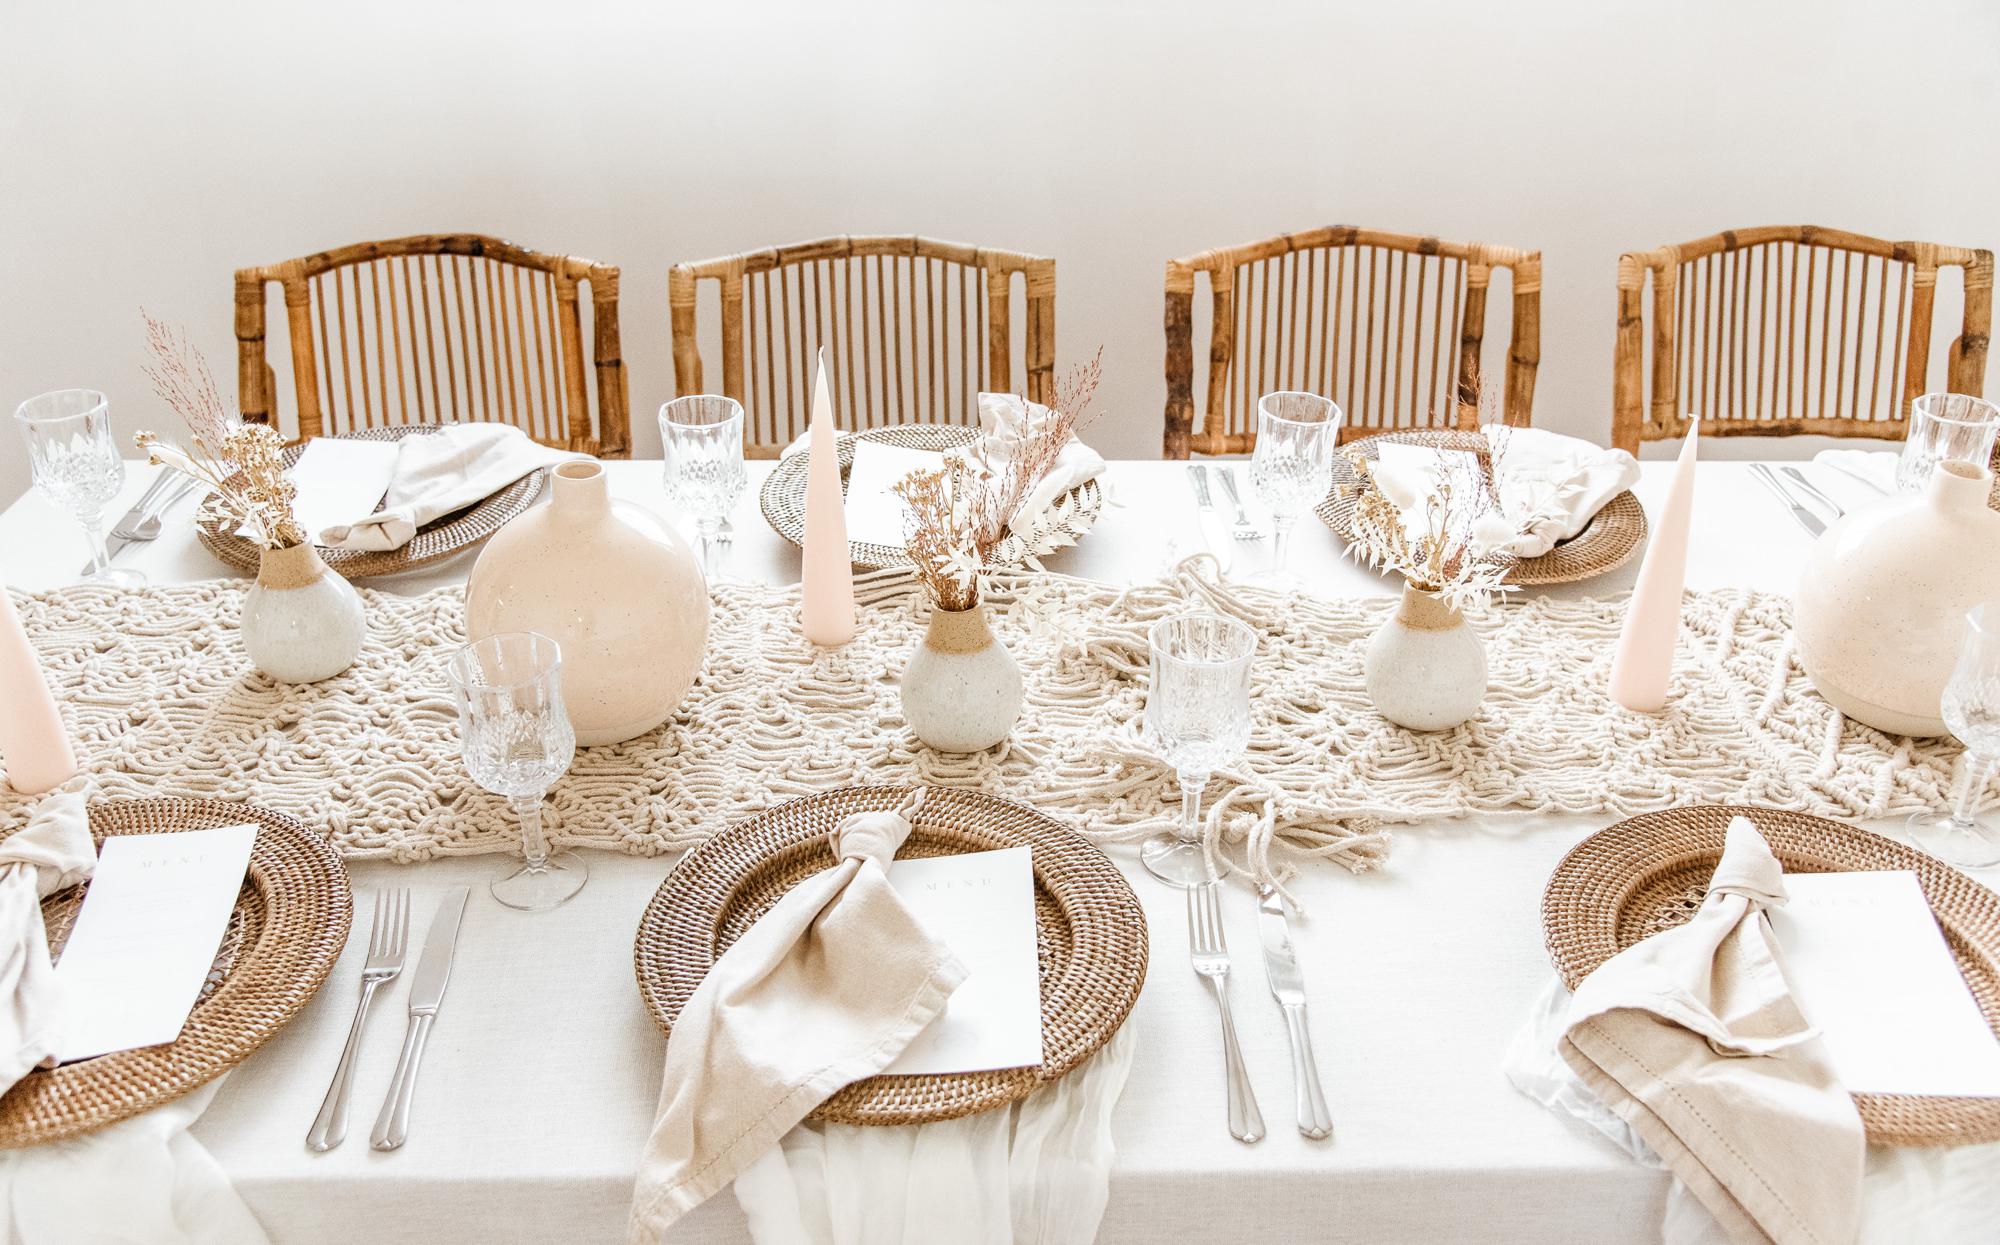 wedding reception table setup with ivory and champagne colored plateware